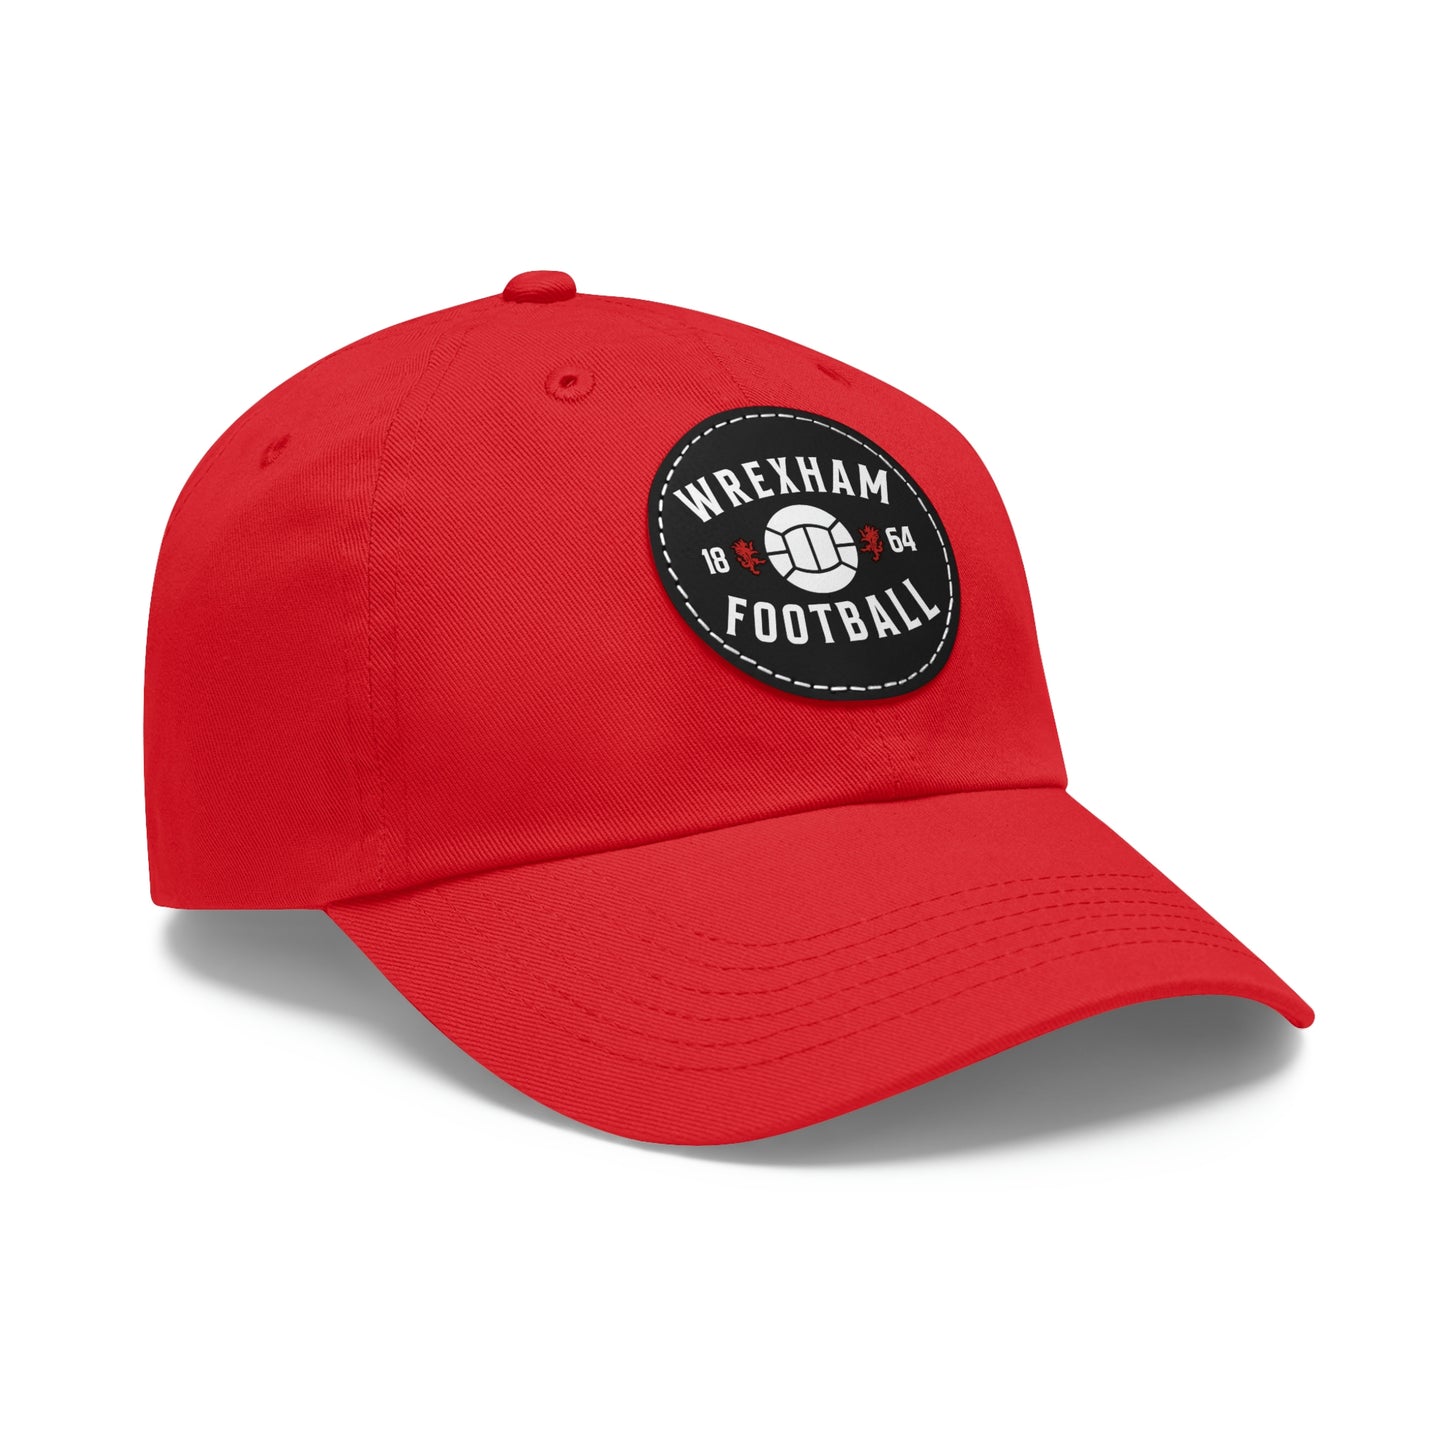 Wrexham Football 1864 Leather Patch Dad Hat